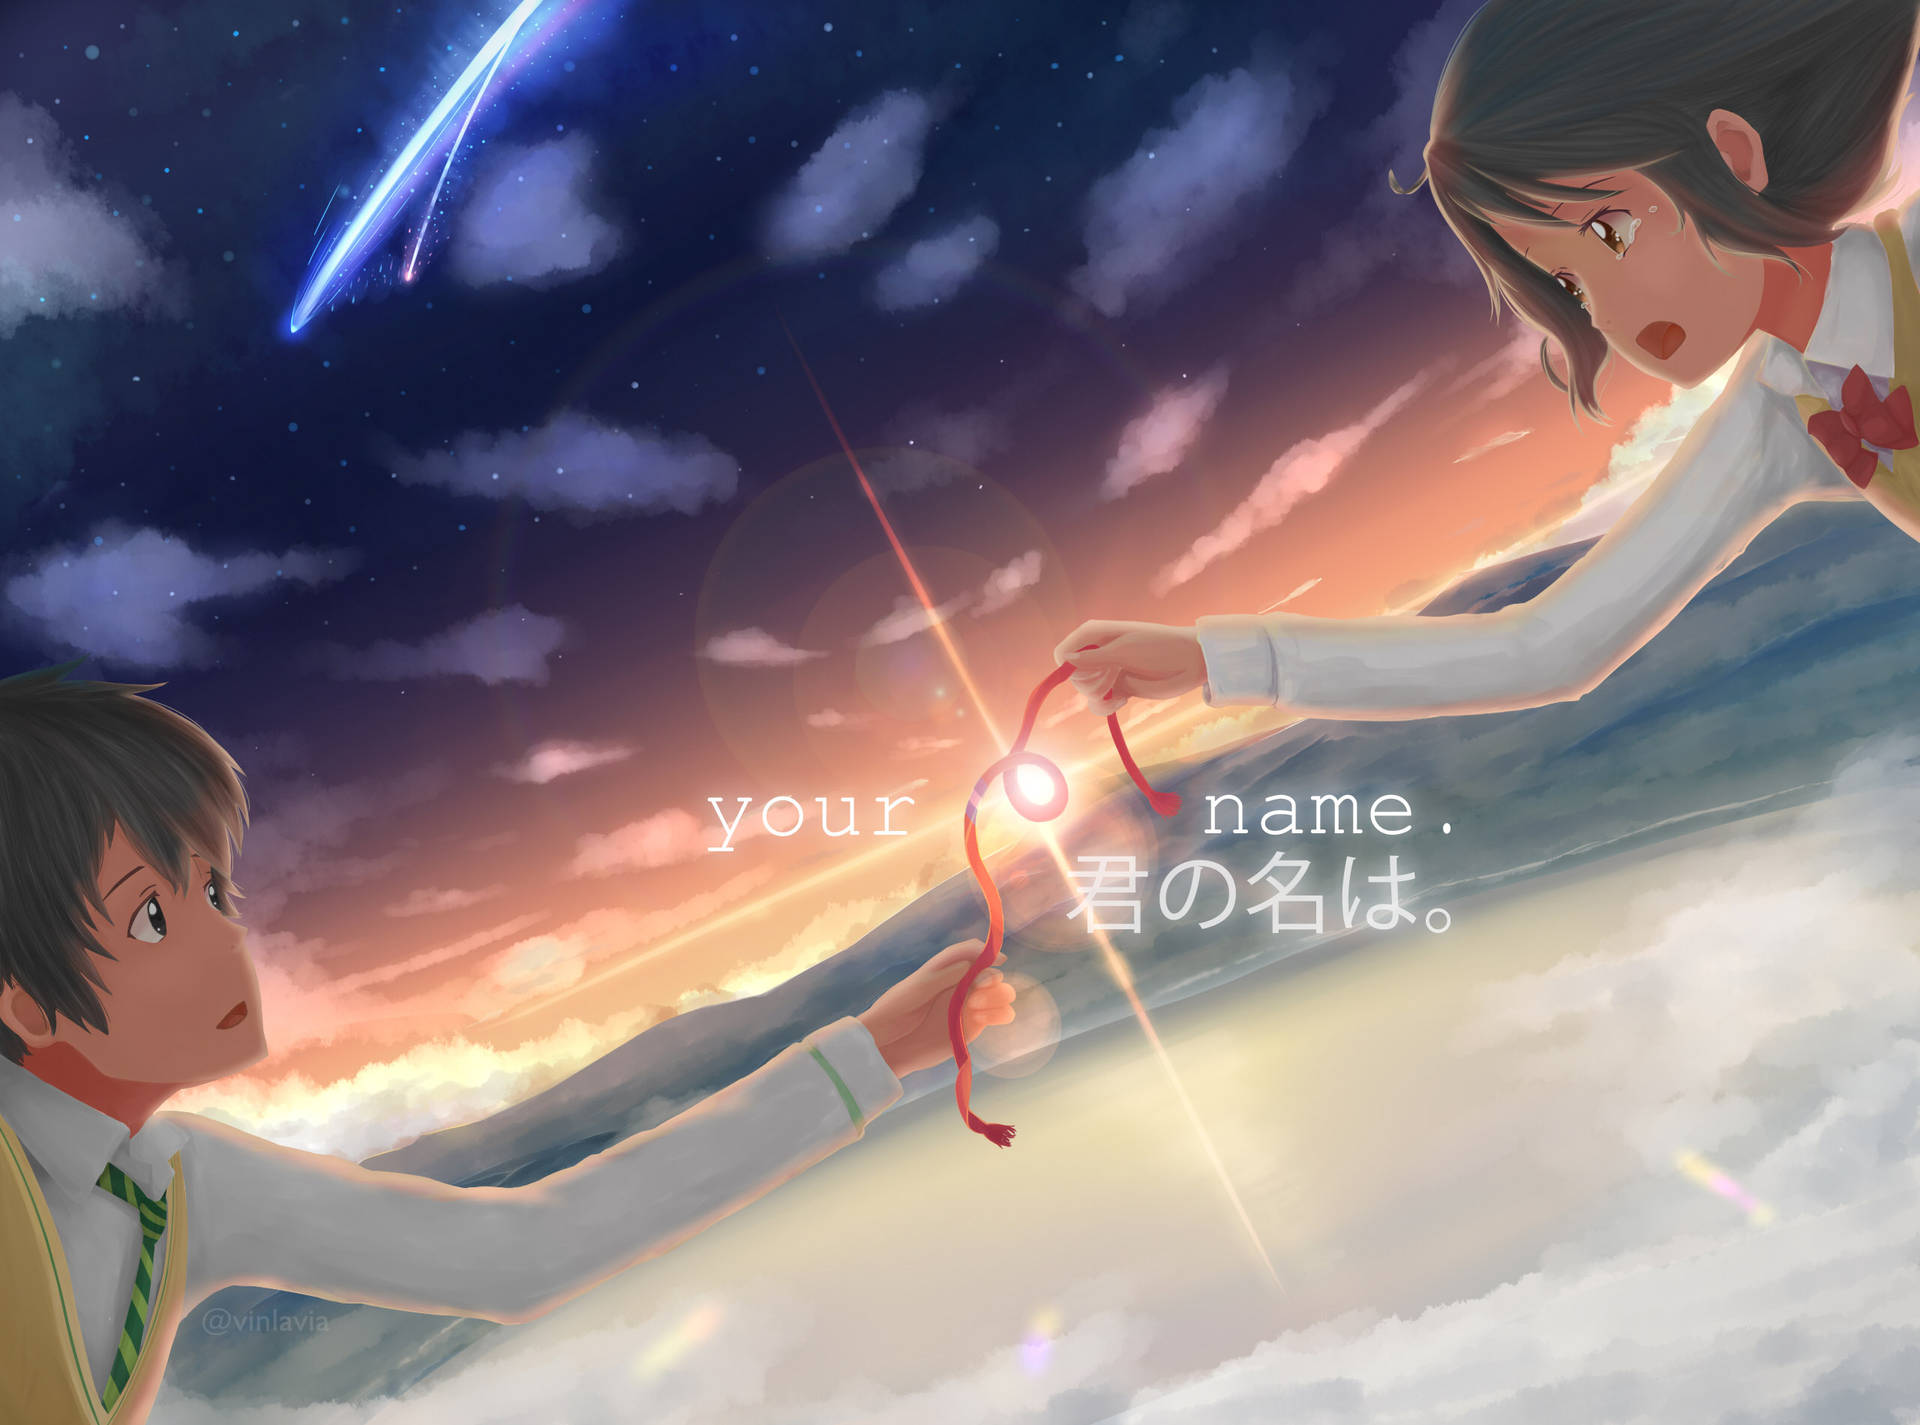 Your Name Anime 2016 Red String Art